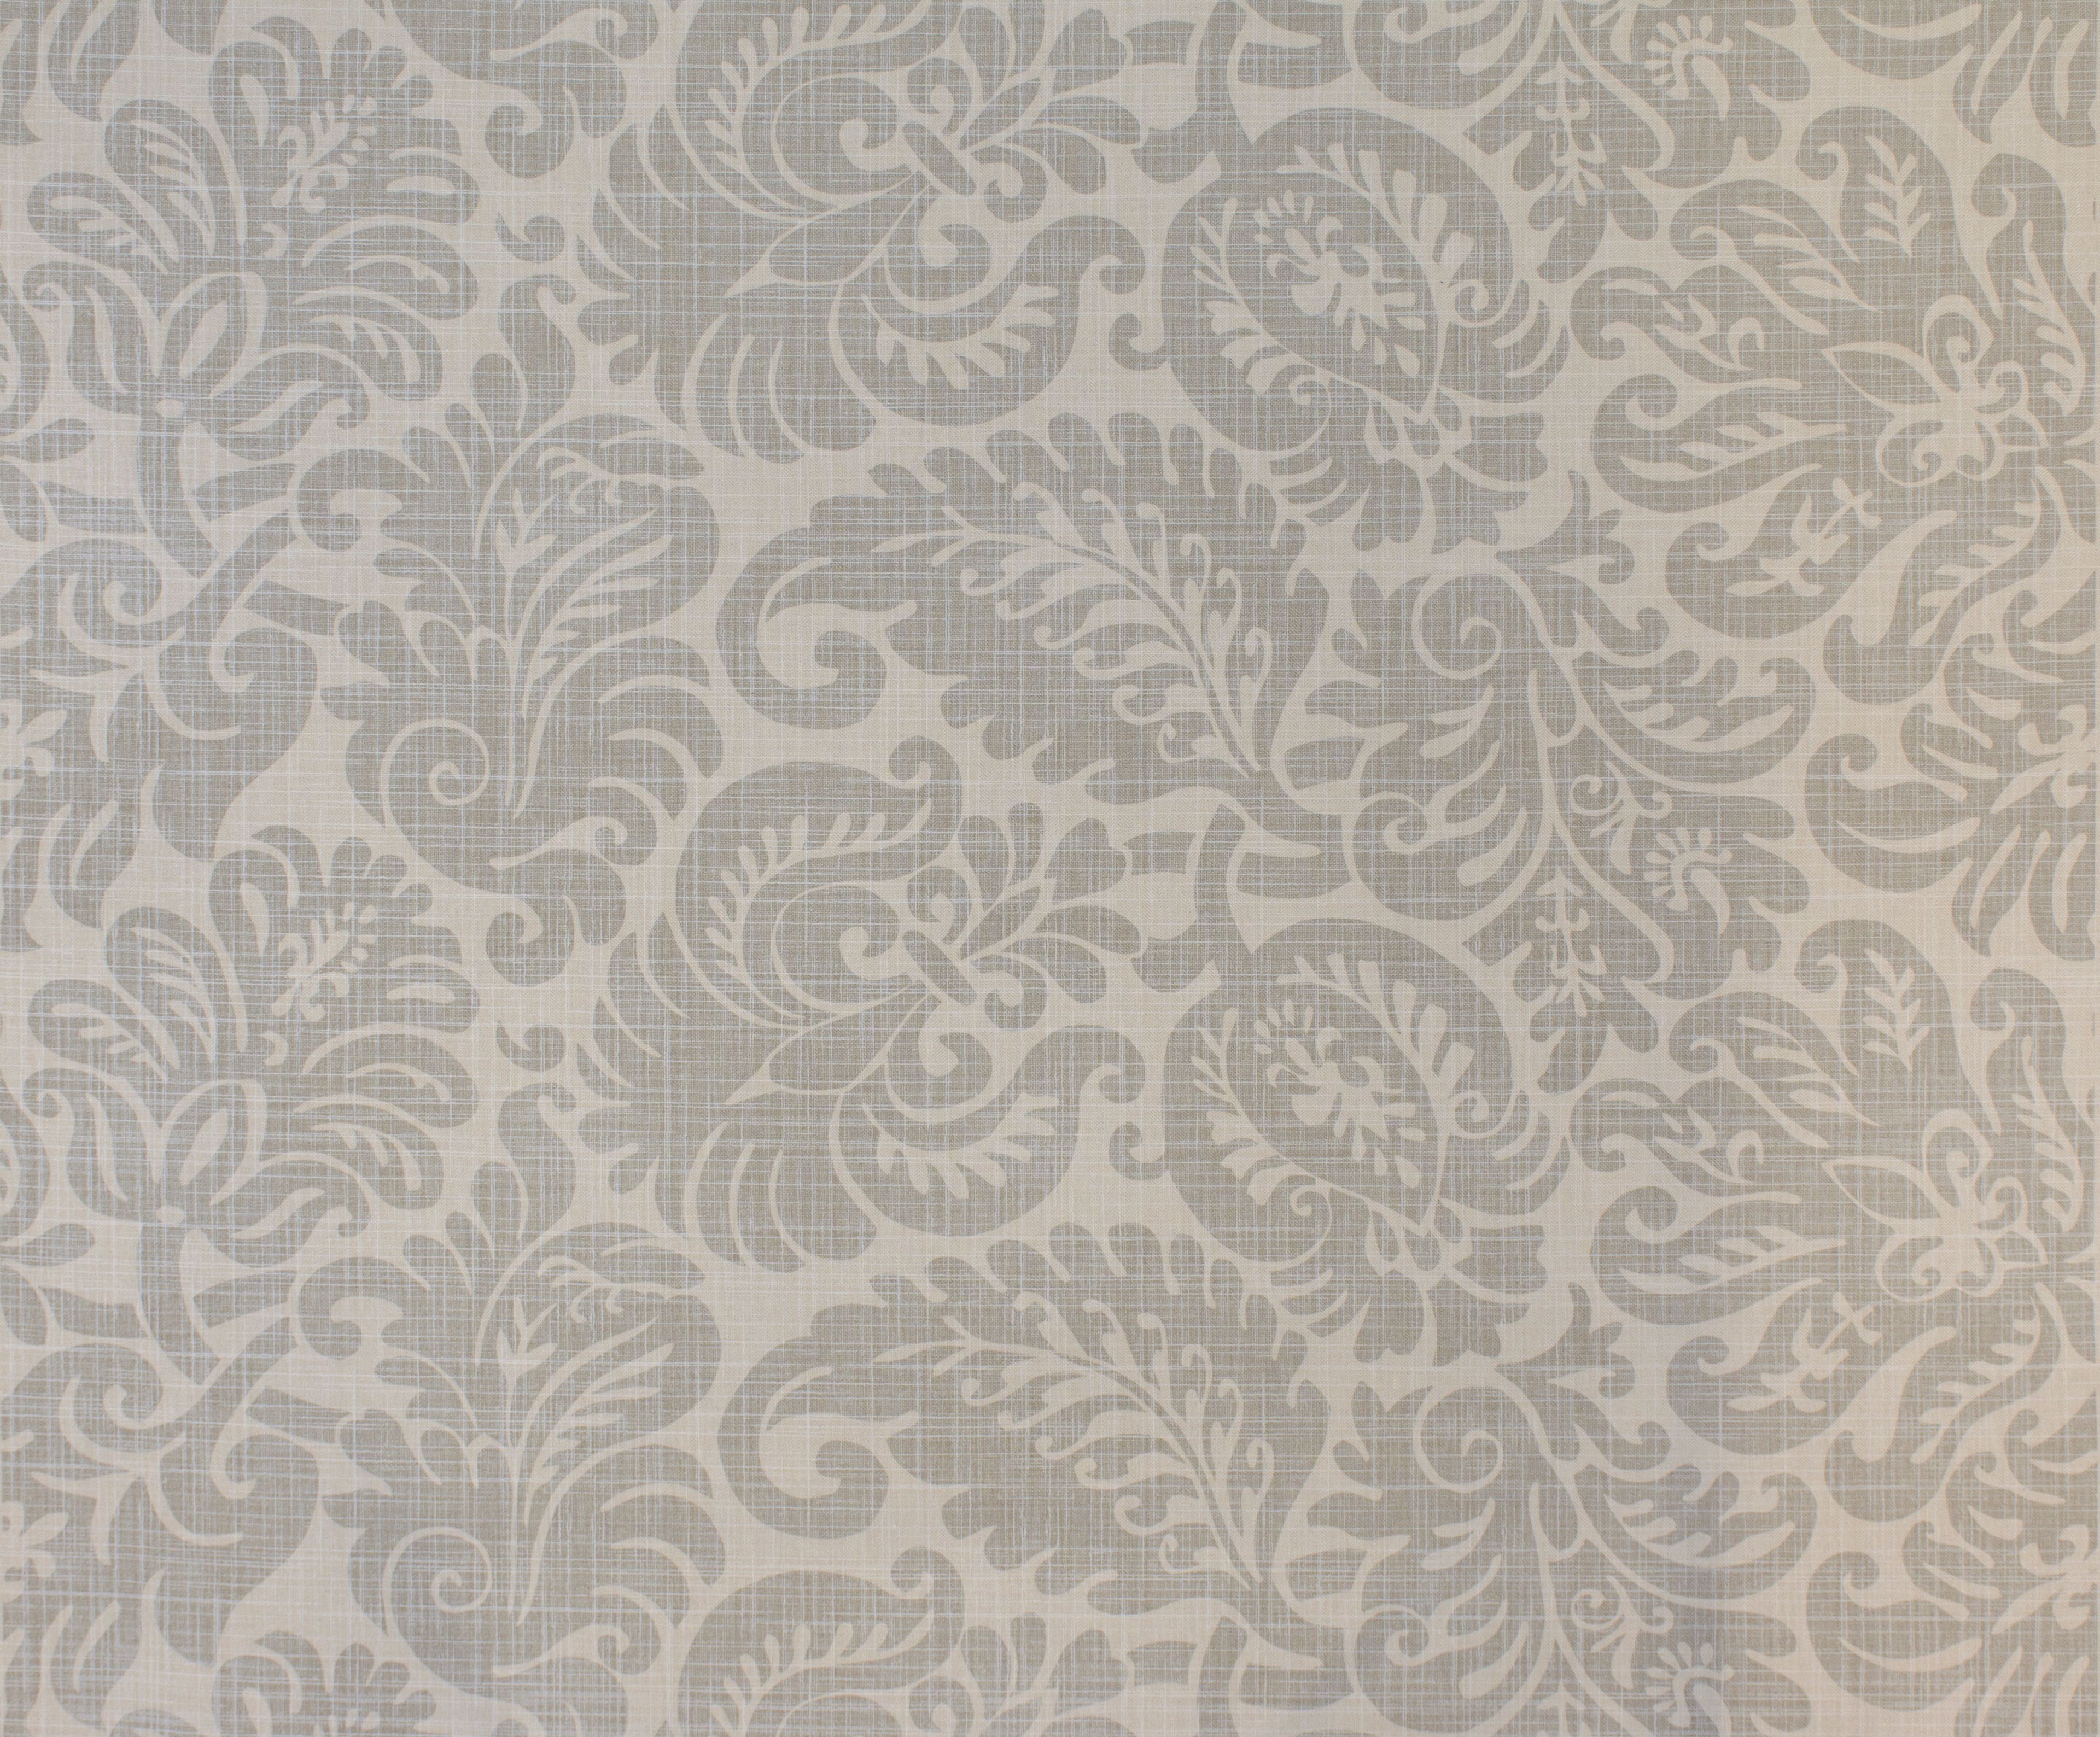 Pamlico fabric in linen color - pattern number M7 00015441 - by Scalamandre in the Old World Weavers collection